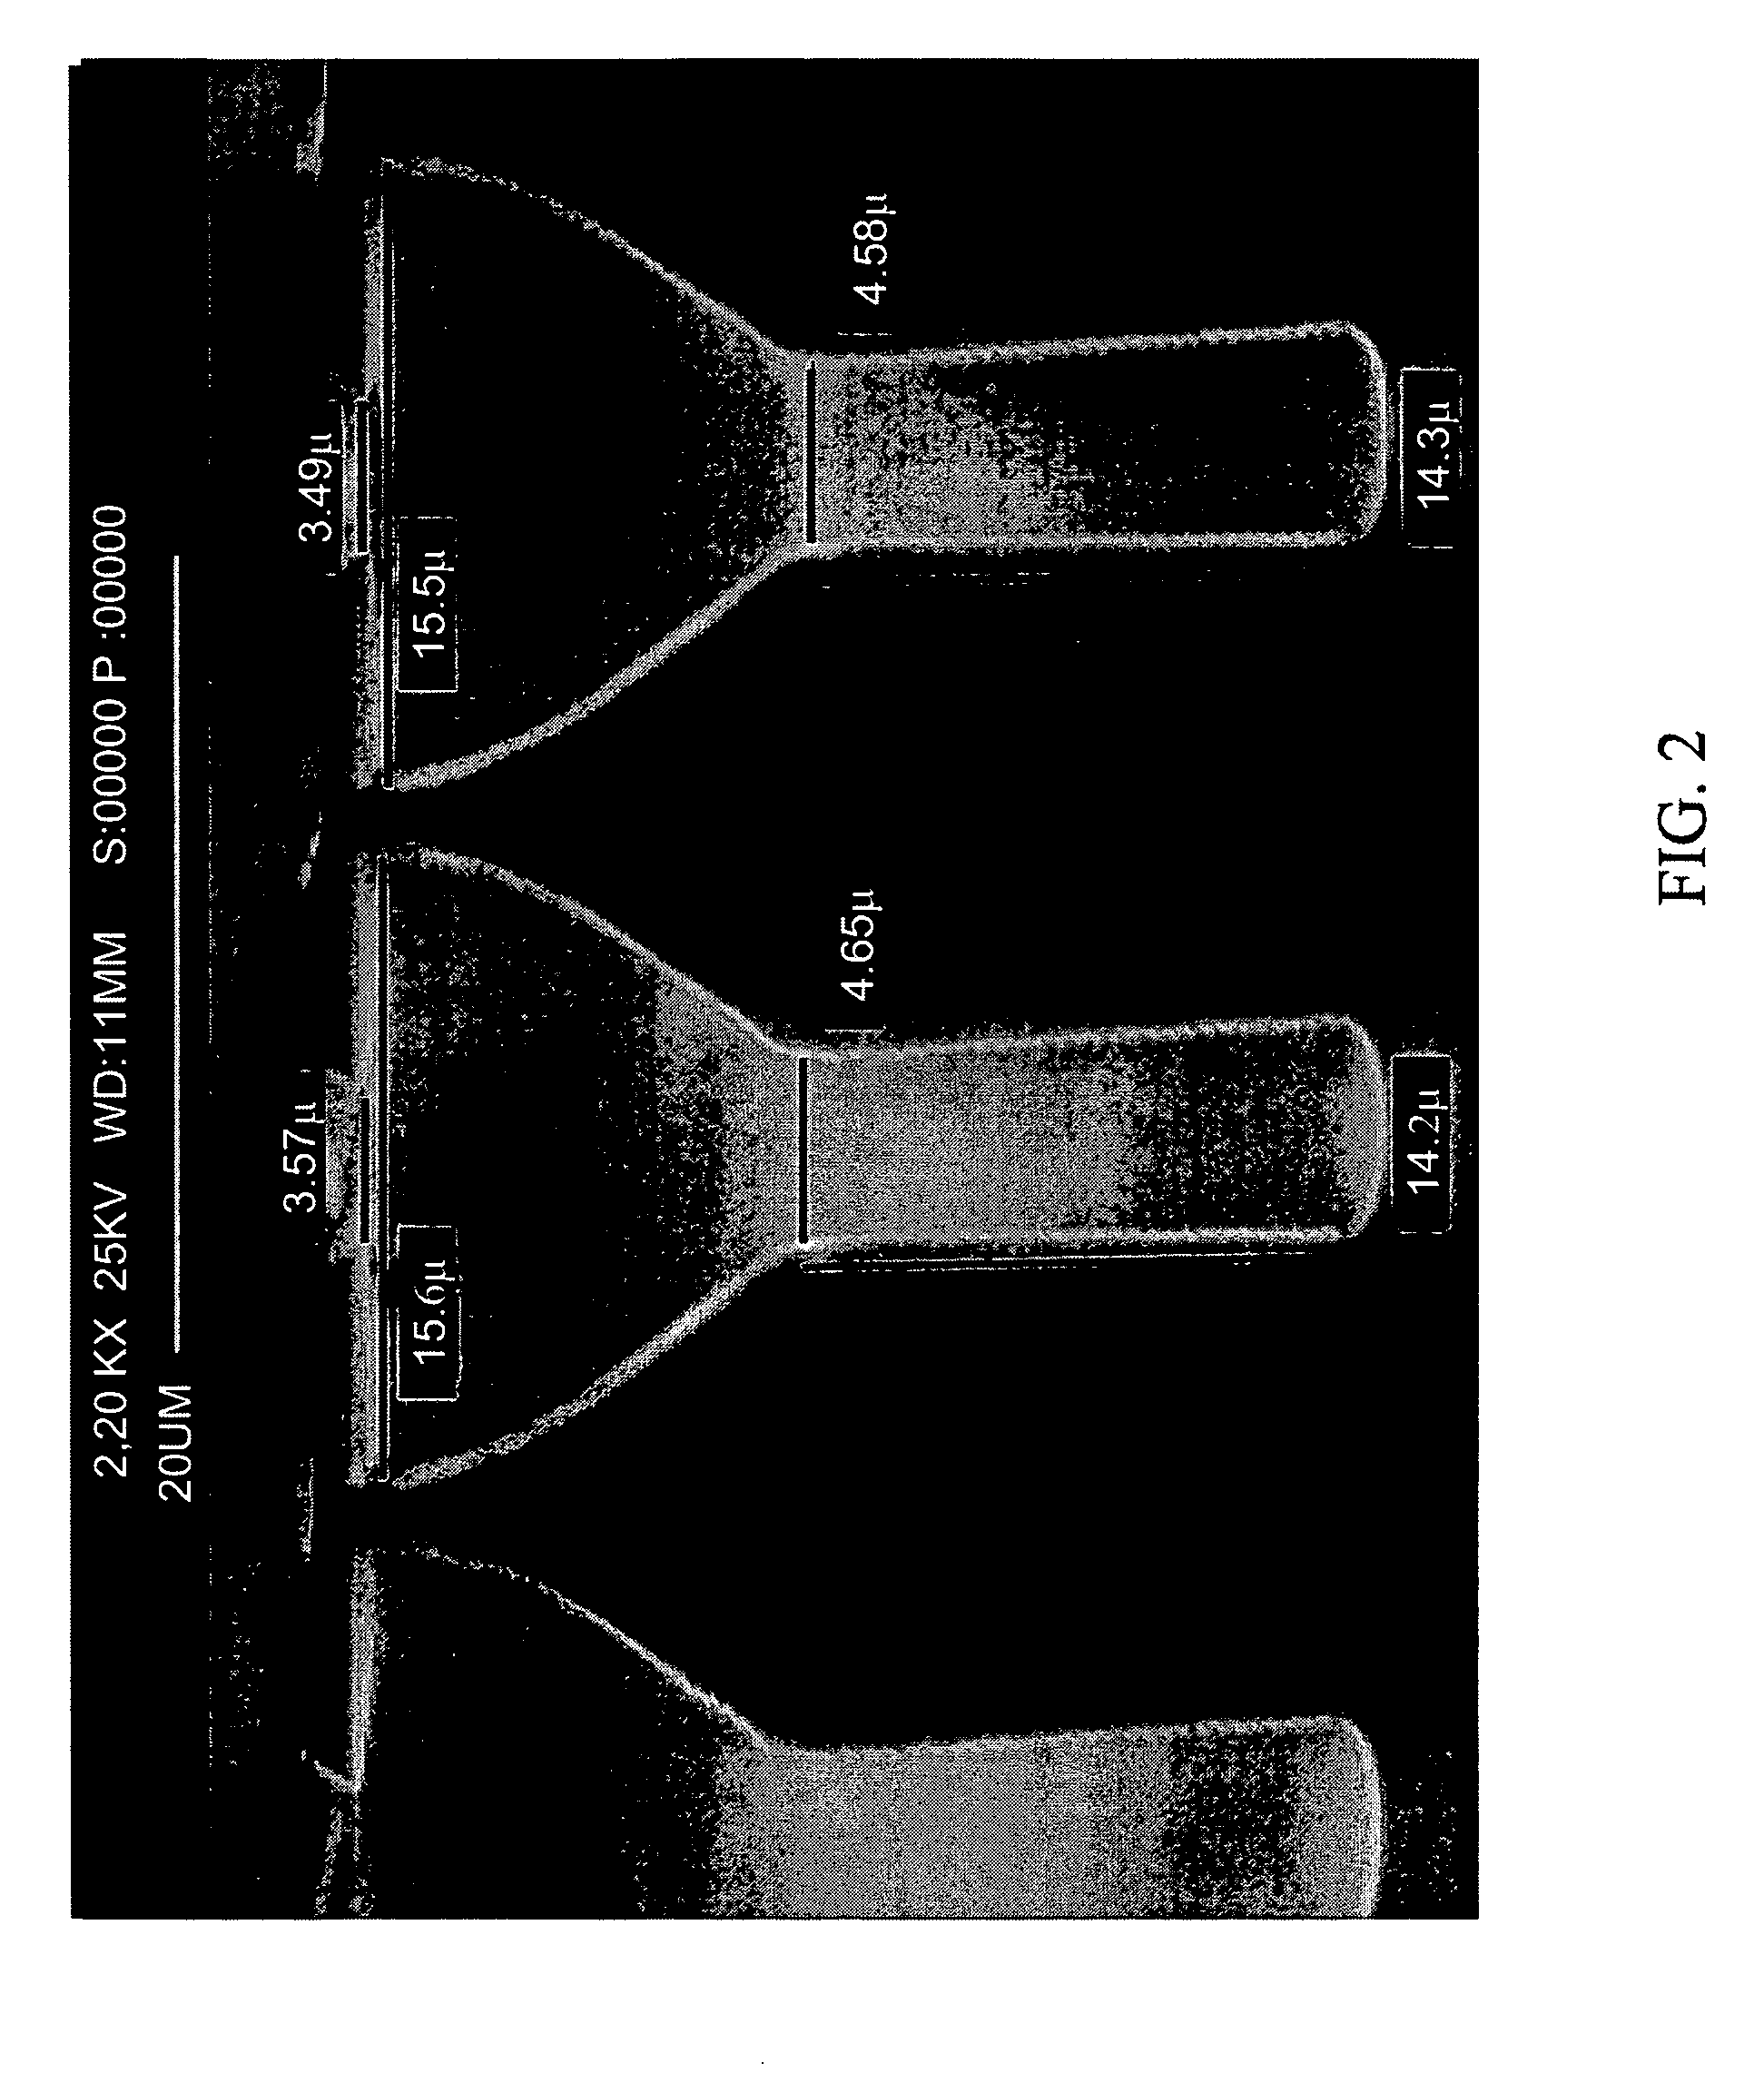 Photovoltaic device and method of its fabrication